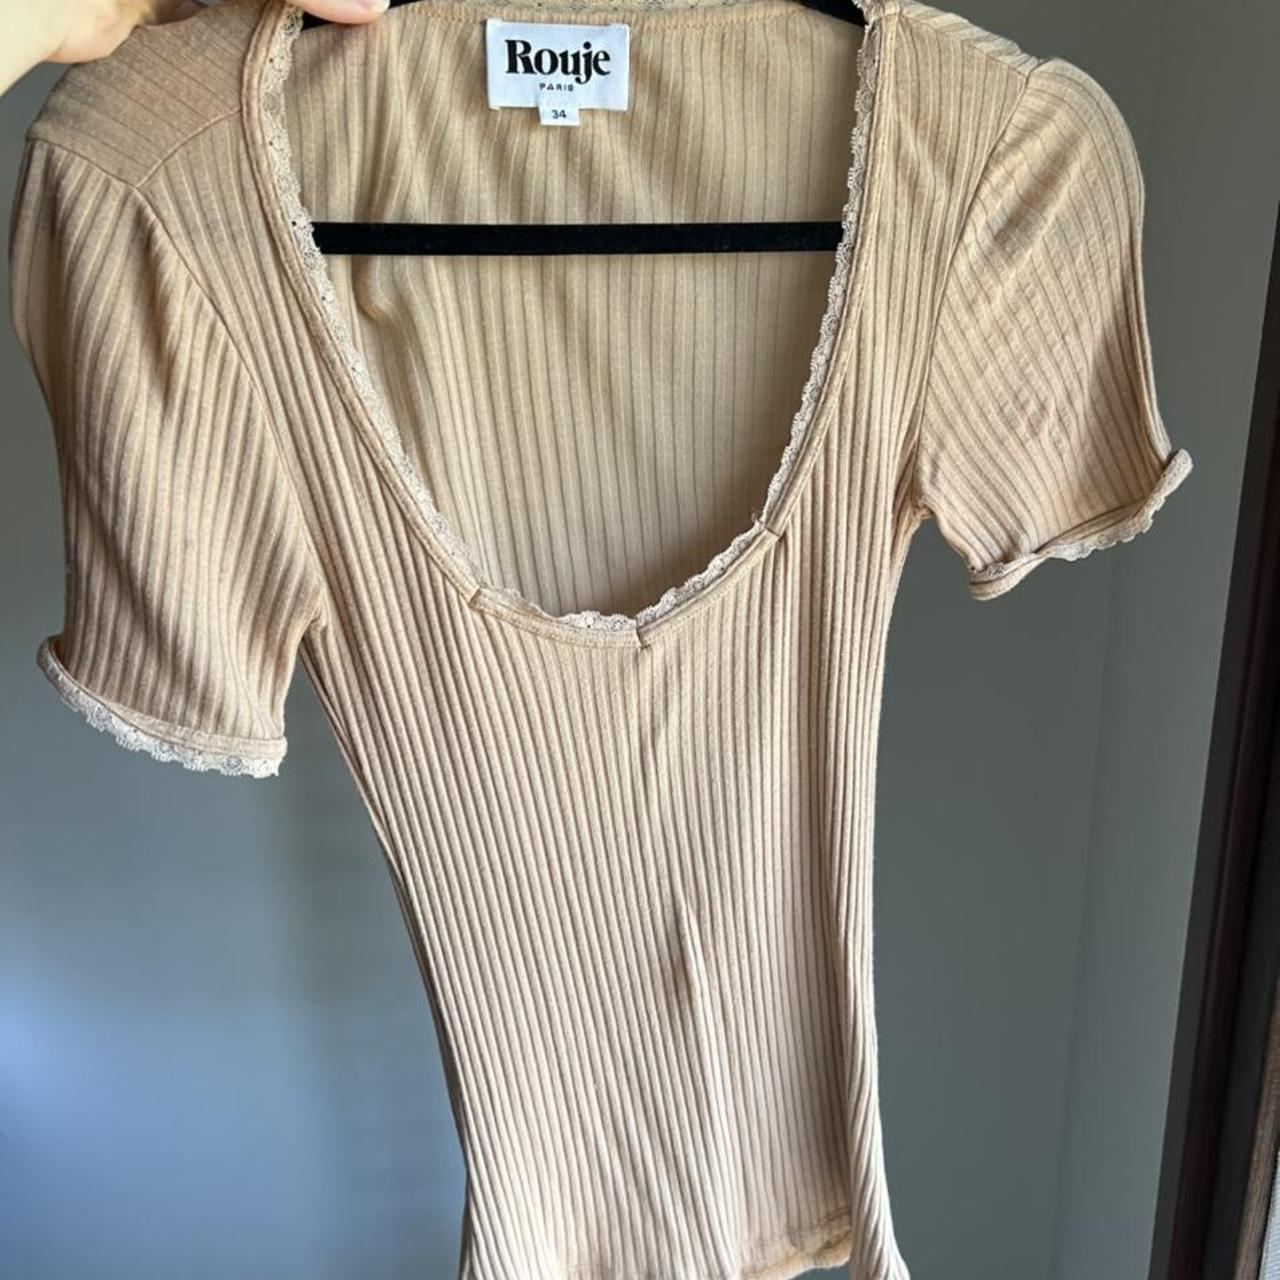 rouje nude lace top price negotiable - Depop